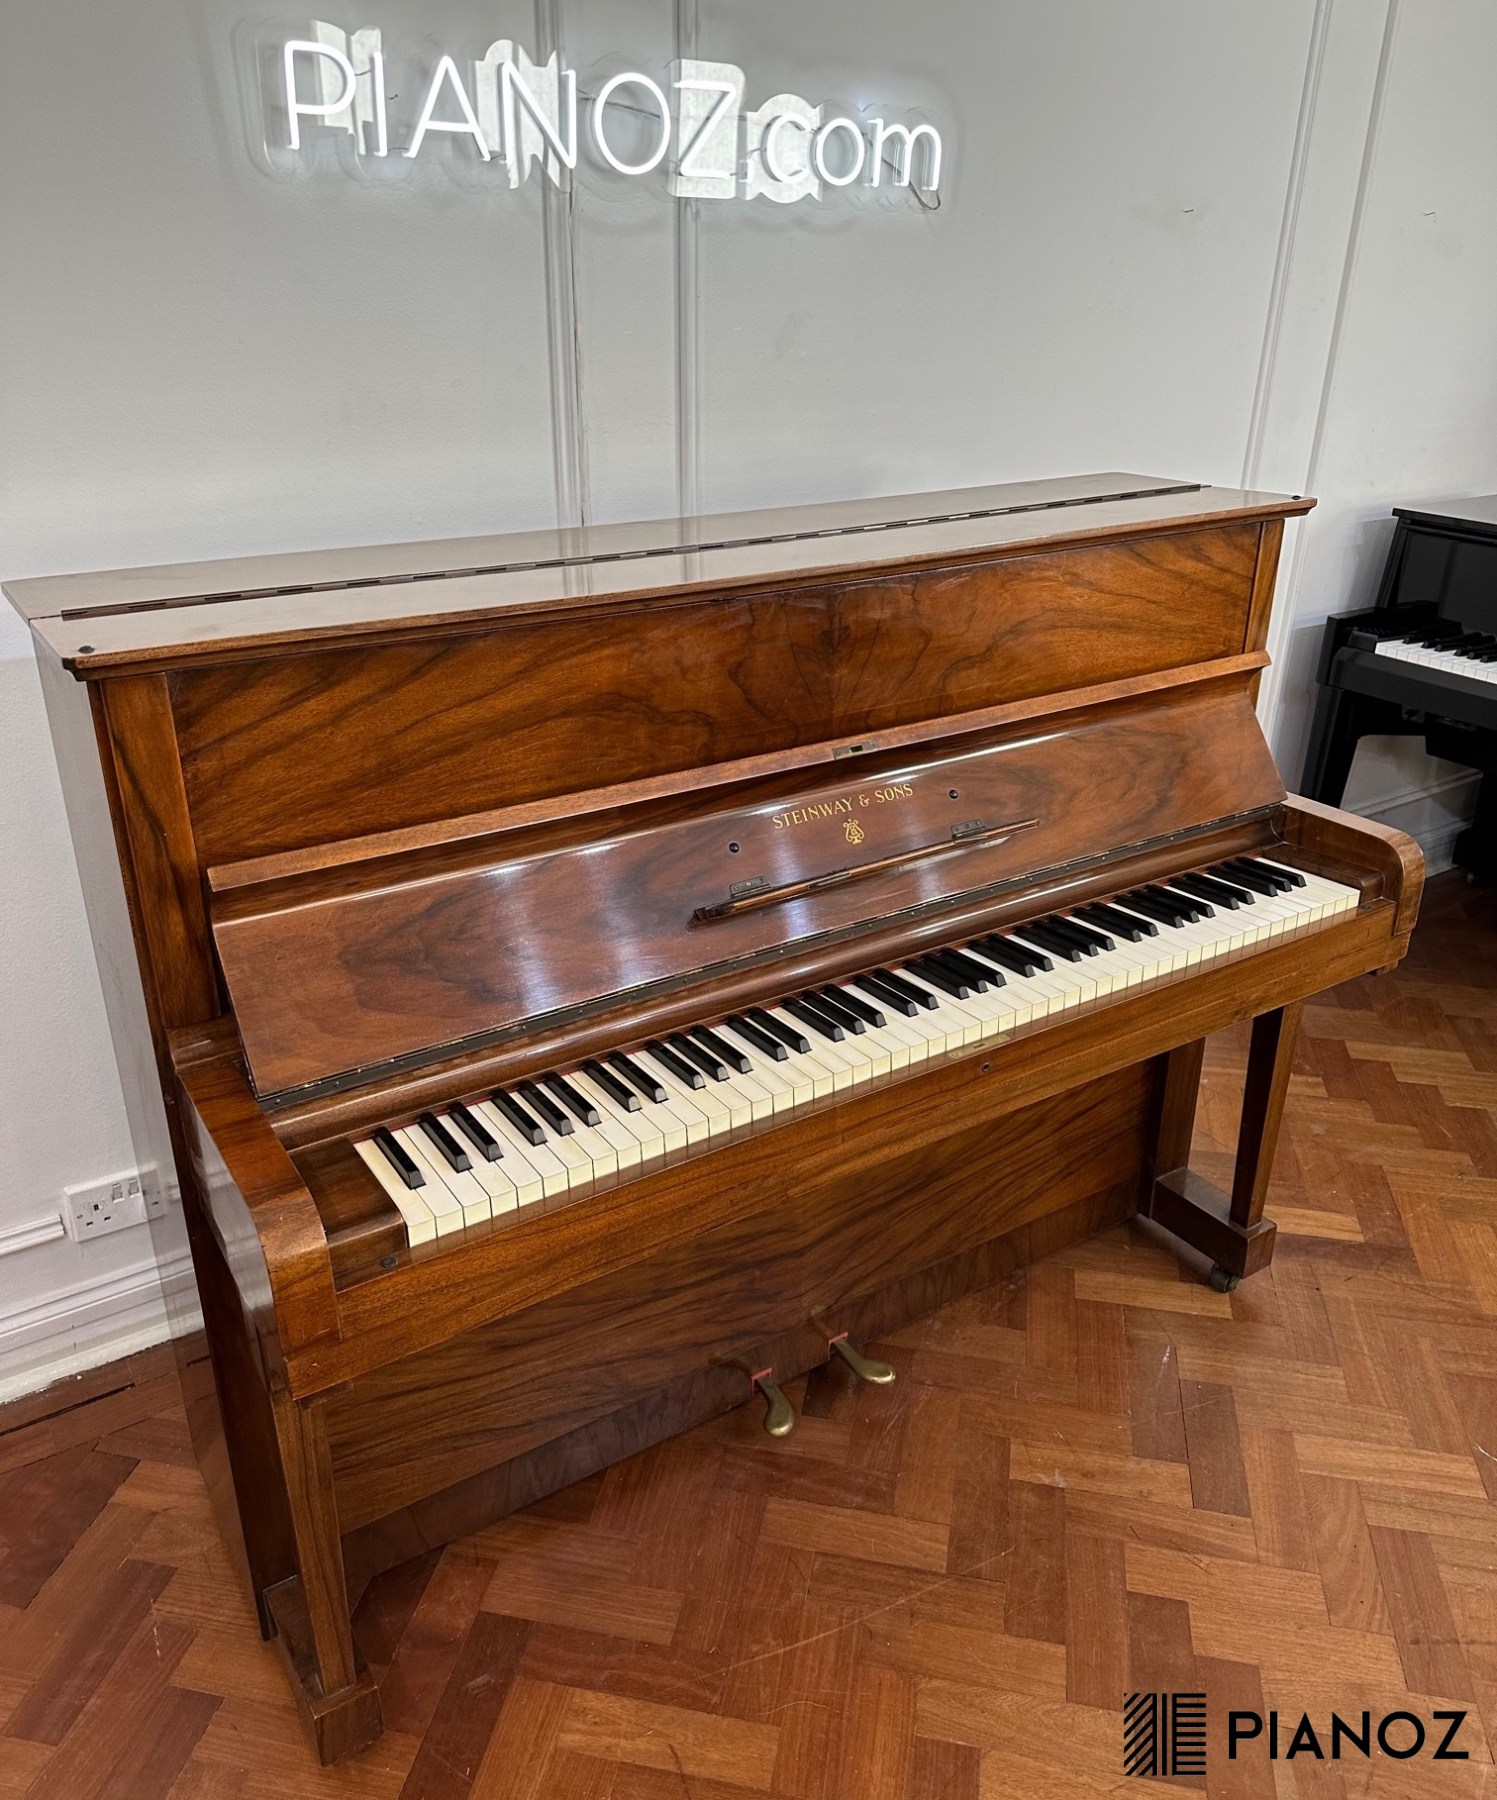 Steinway & Sons Model Z 1938 Upright Piano piano for sale in UK